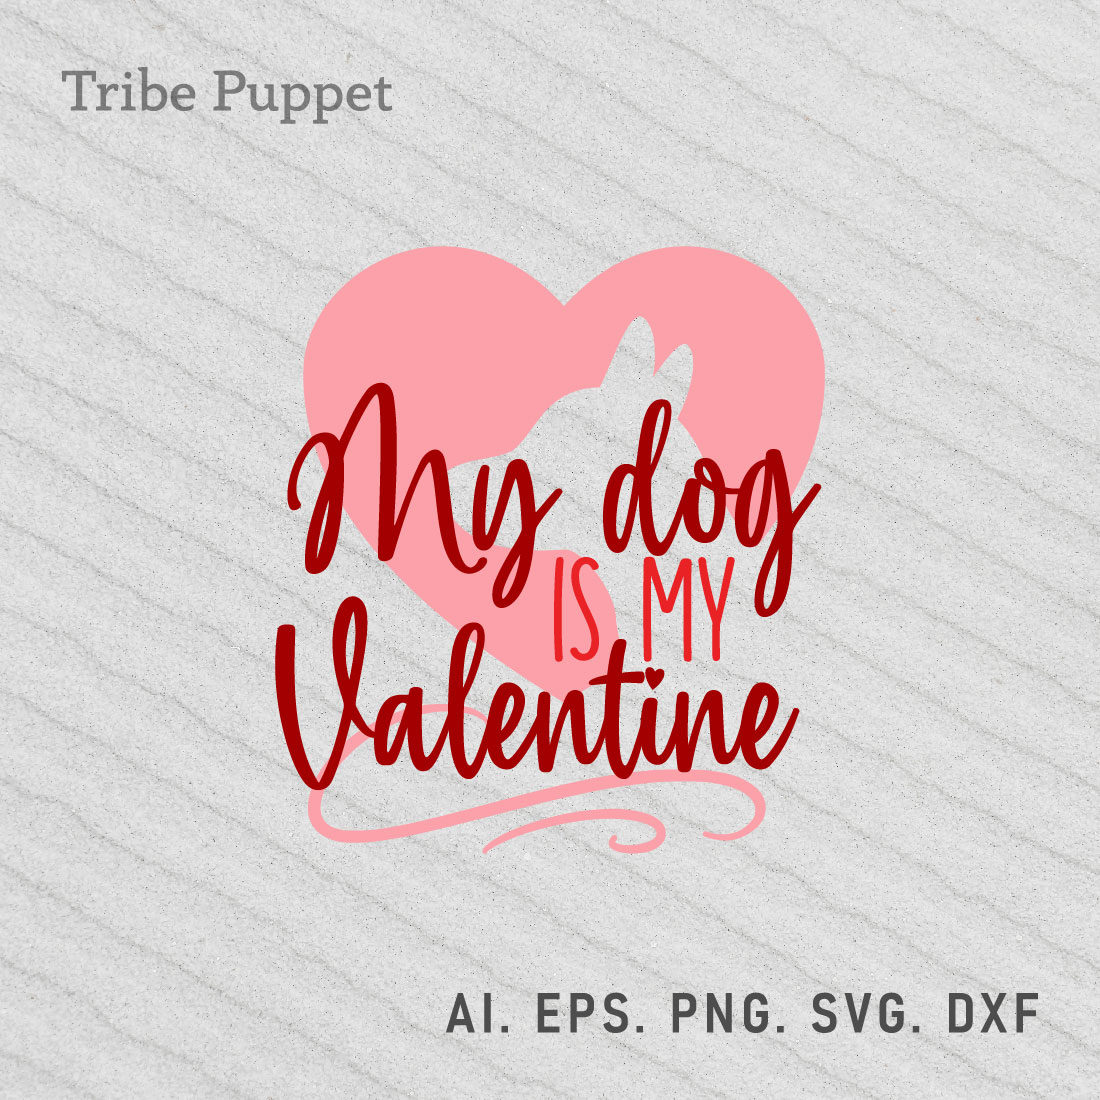 Dog valentines day quotes preview image.